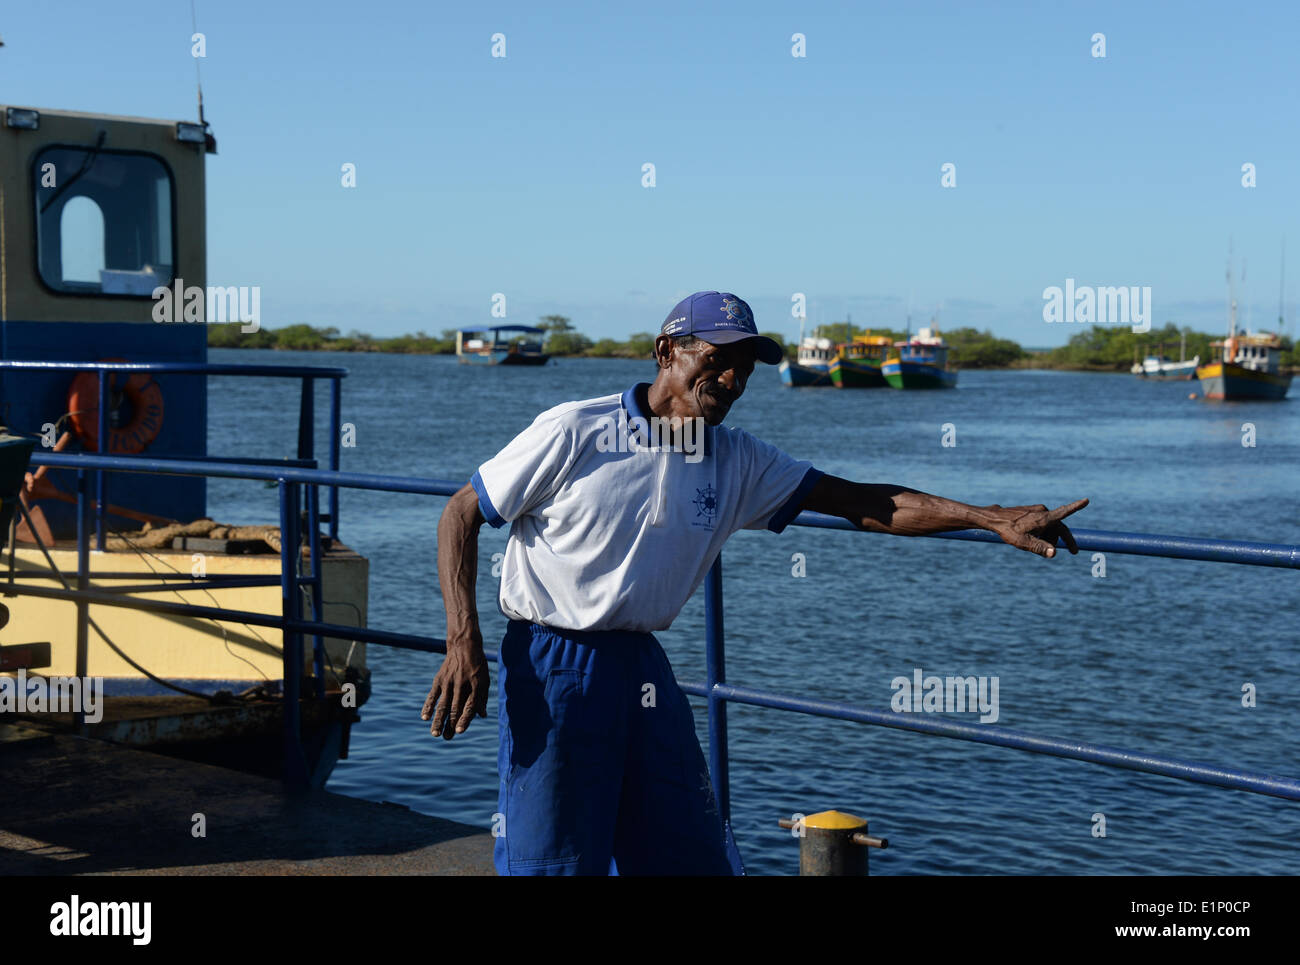 Santo Andre, Brazil. 07th June, 2014. Ferryman Manuel gives directions to passengers on a ferry from Santa Cruz Cabralia to Santo Andre, Brazil, 07 June 2014. The FIFA World Cup will take place in Brazil from 12 June to 13 July 2014. Photo: Marcus Brandt/dpa/Alamy Live News Stock Photo